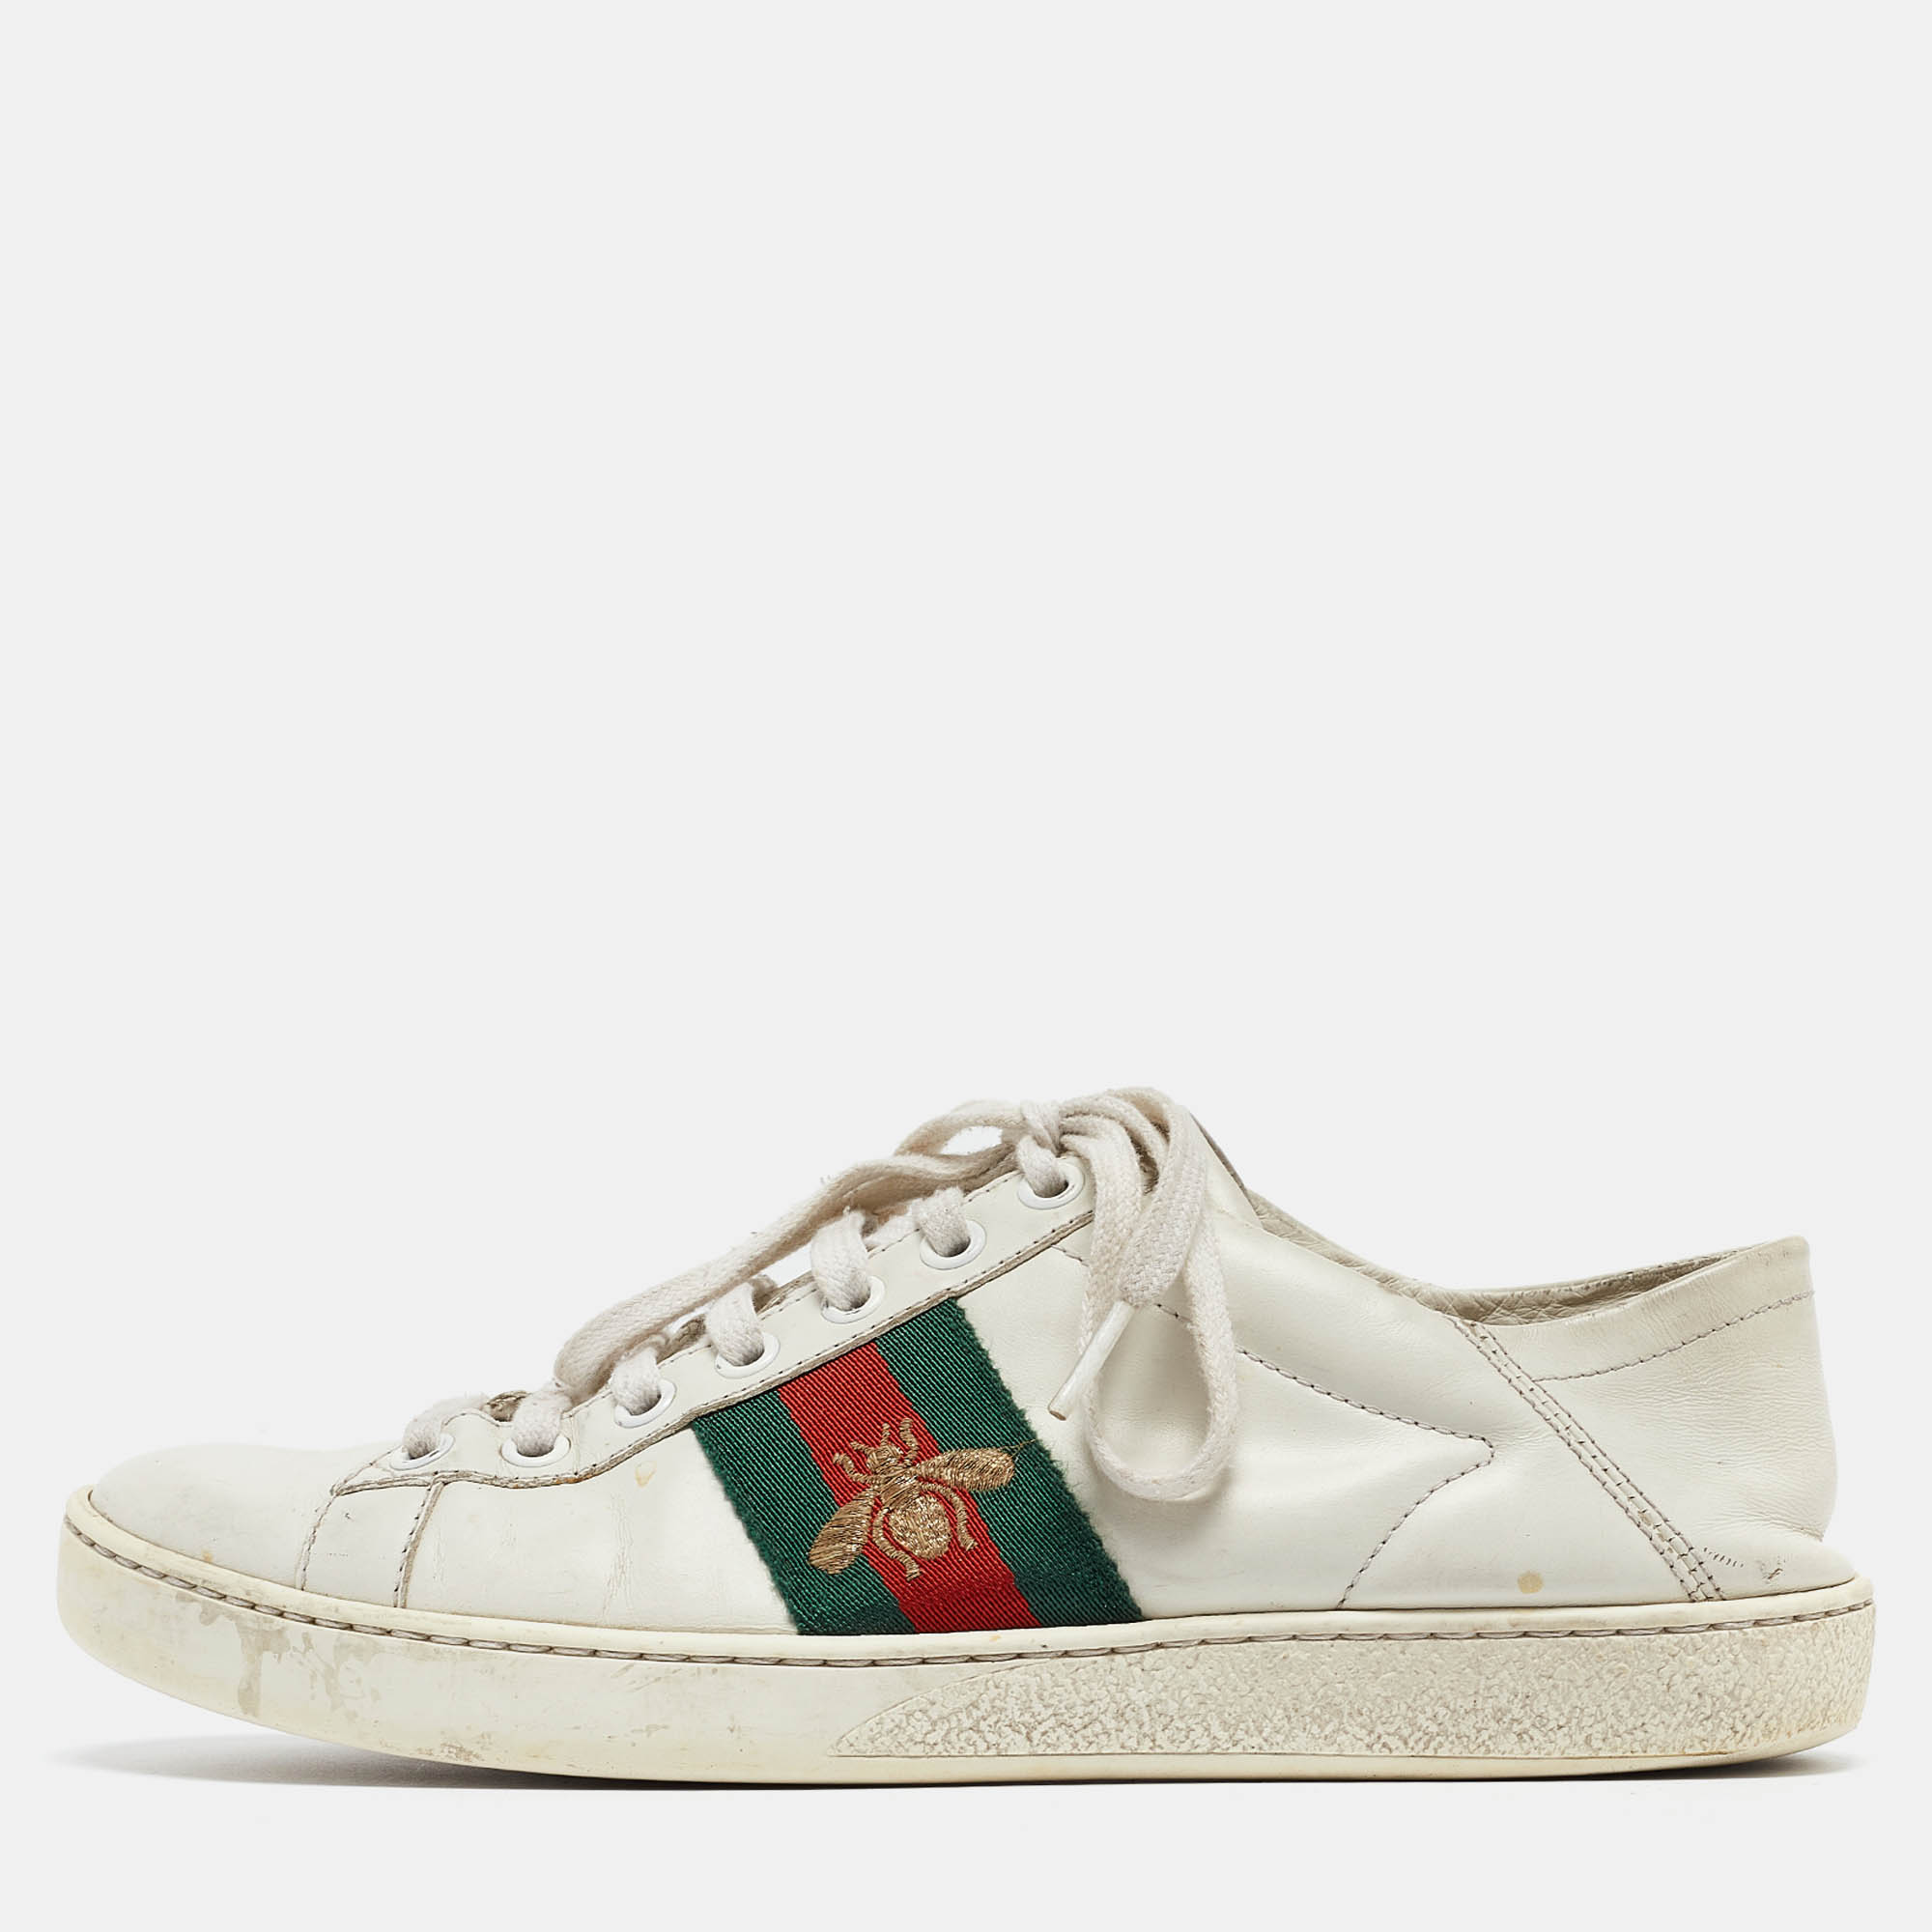 Gucci white leather ace low top sneakers size 37